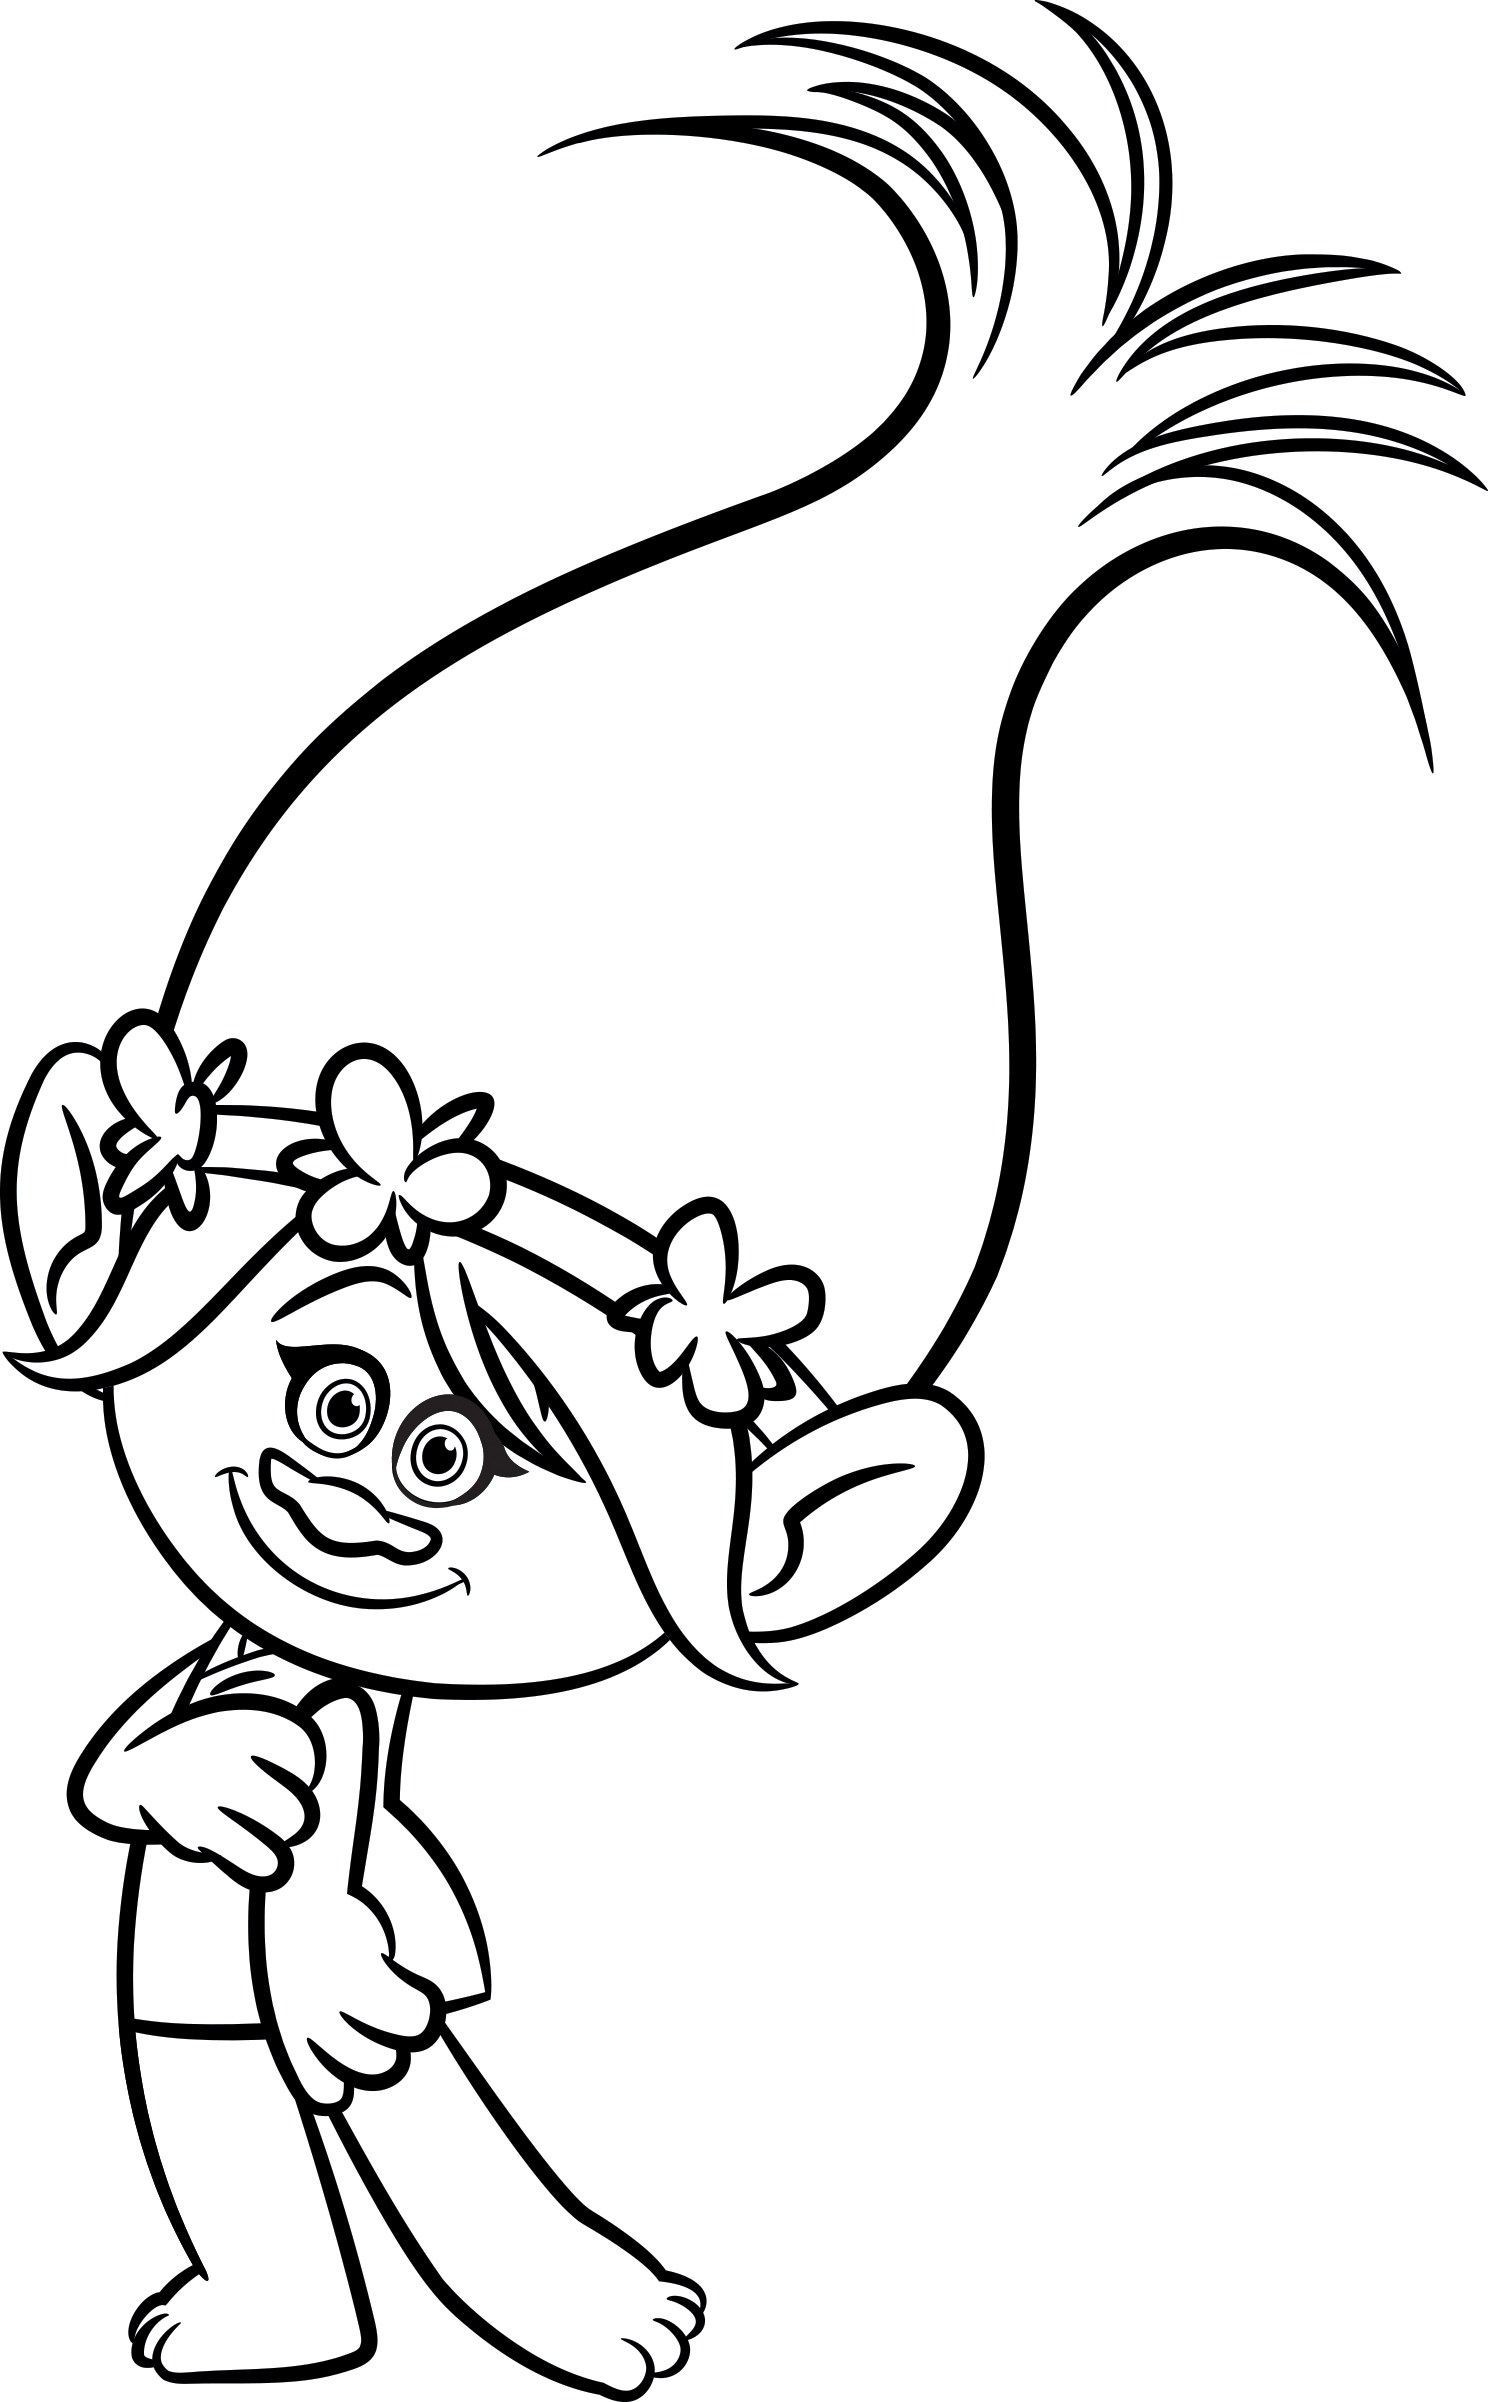 Coloring Pages Of Princess Poppy